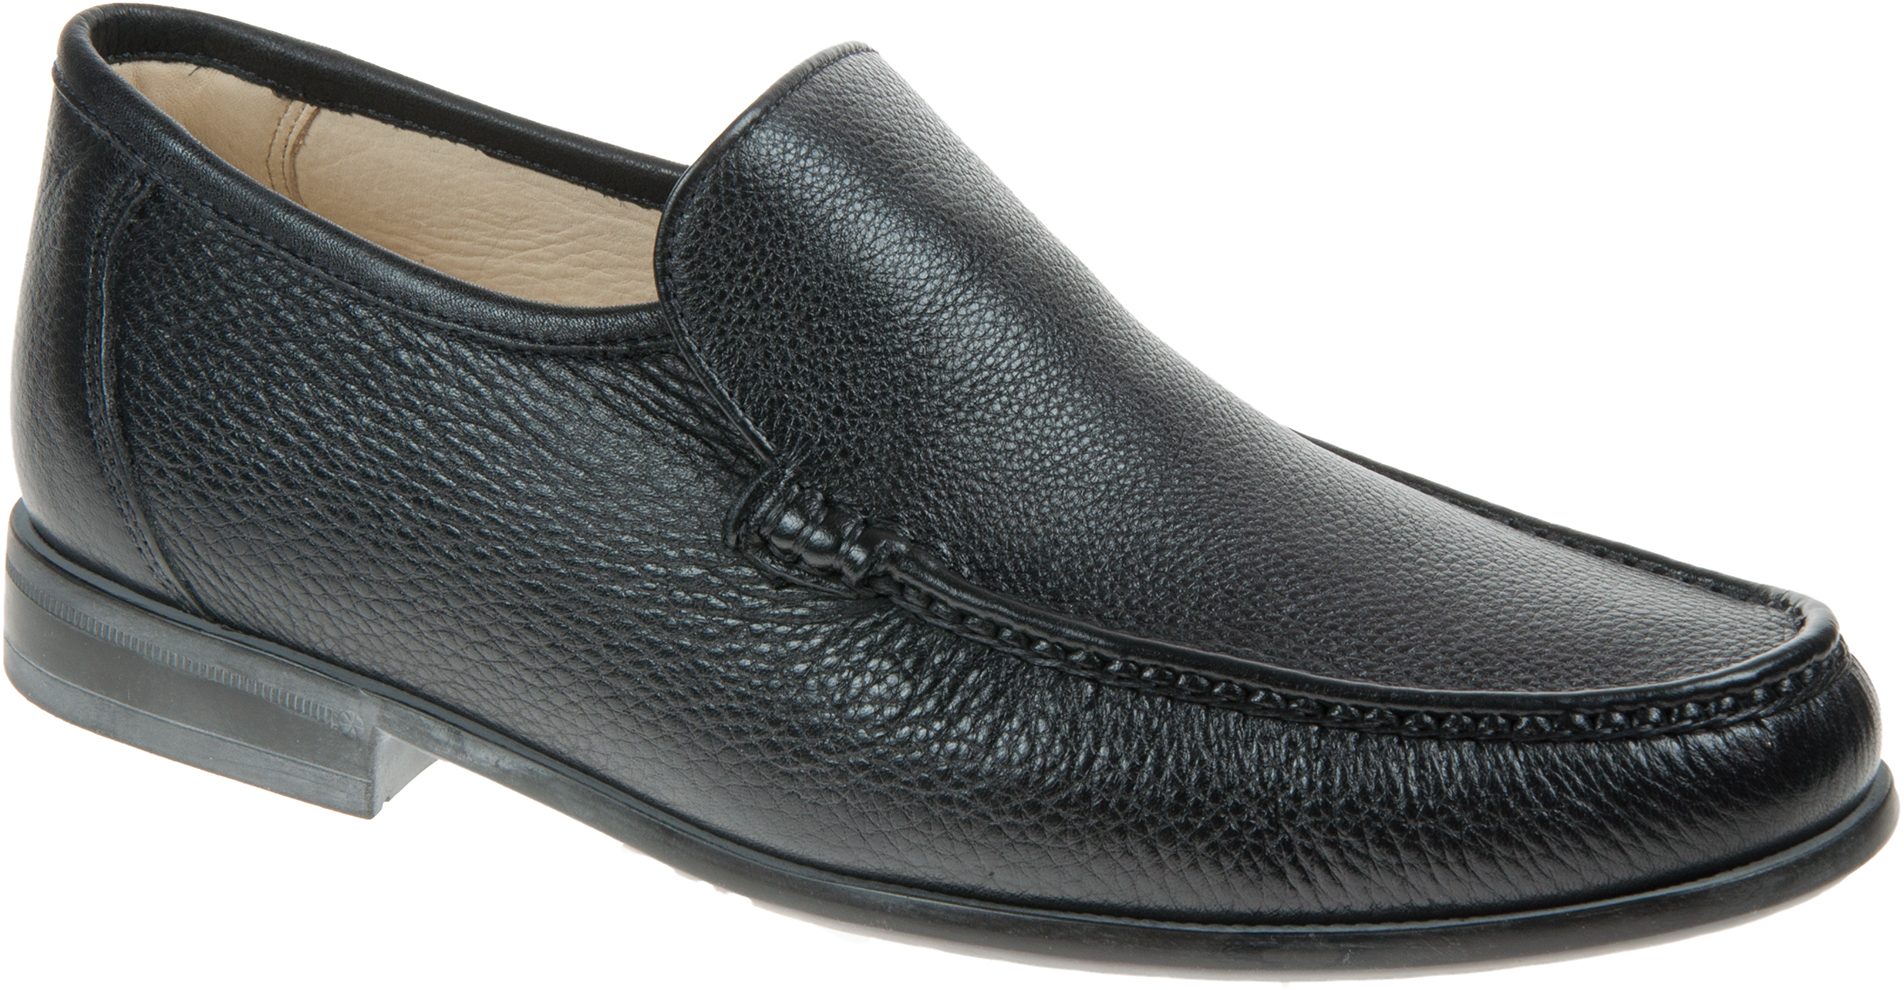 Anatomic & Co Torres Black 828226 - Formal Shoes - Humphries Shoes